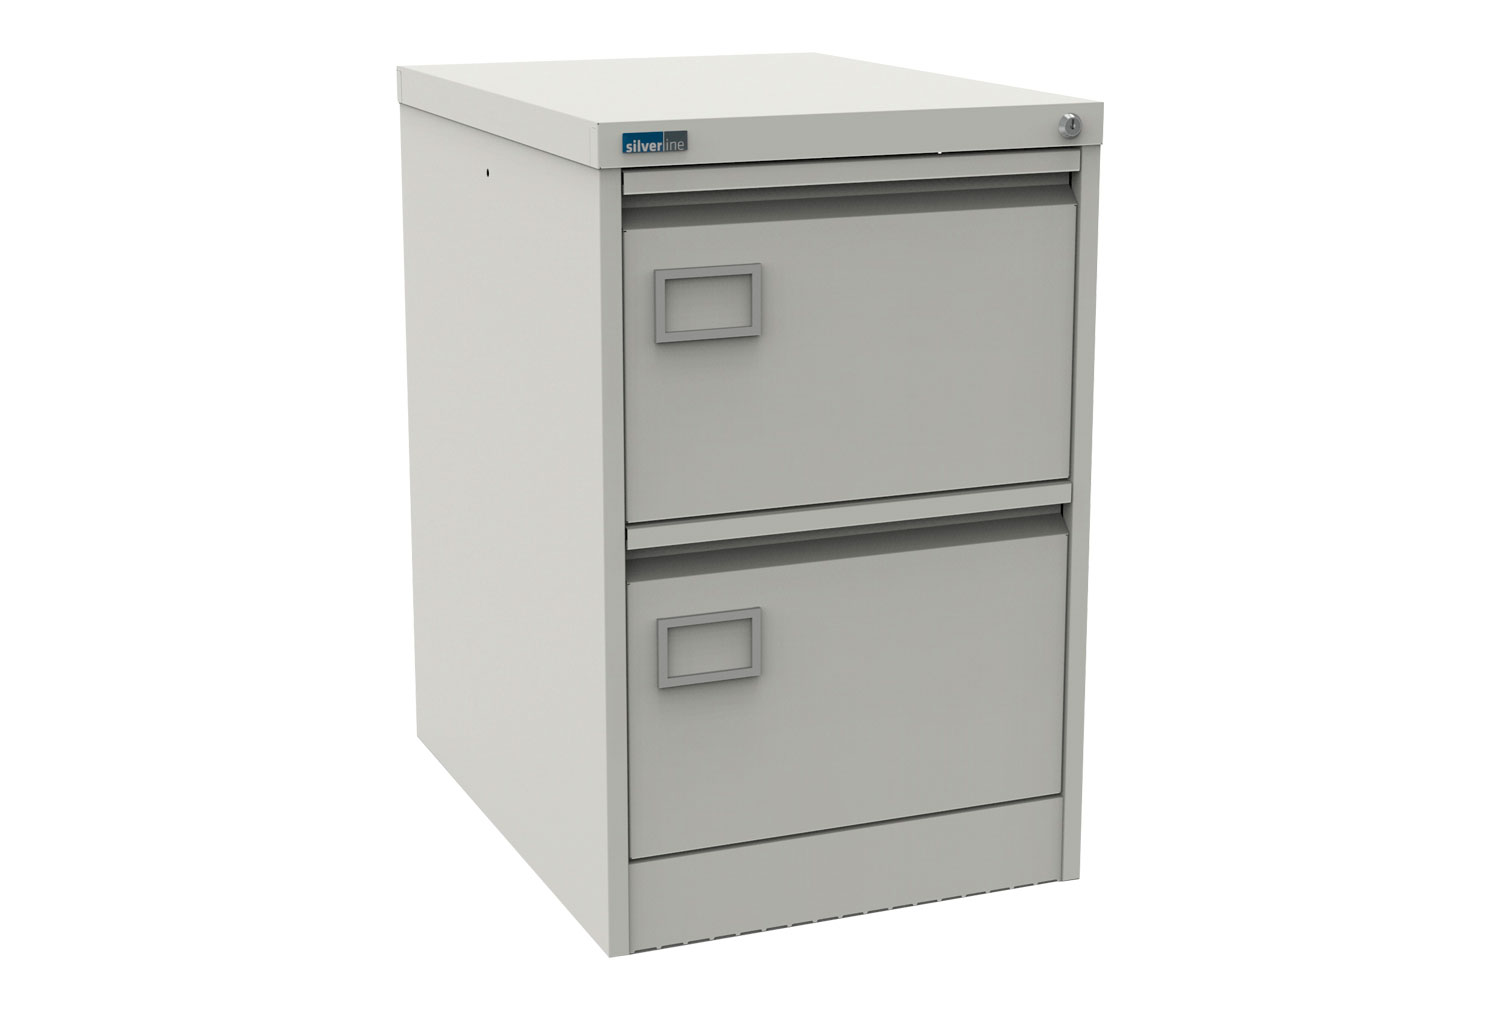 Silverline Executive 2 Drawer Filing Cabinets, 2 Drawer - 40wx62dx71h (cm), Traffic White, Fully Installed